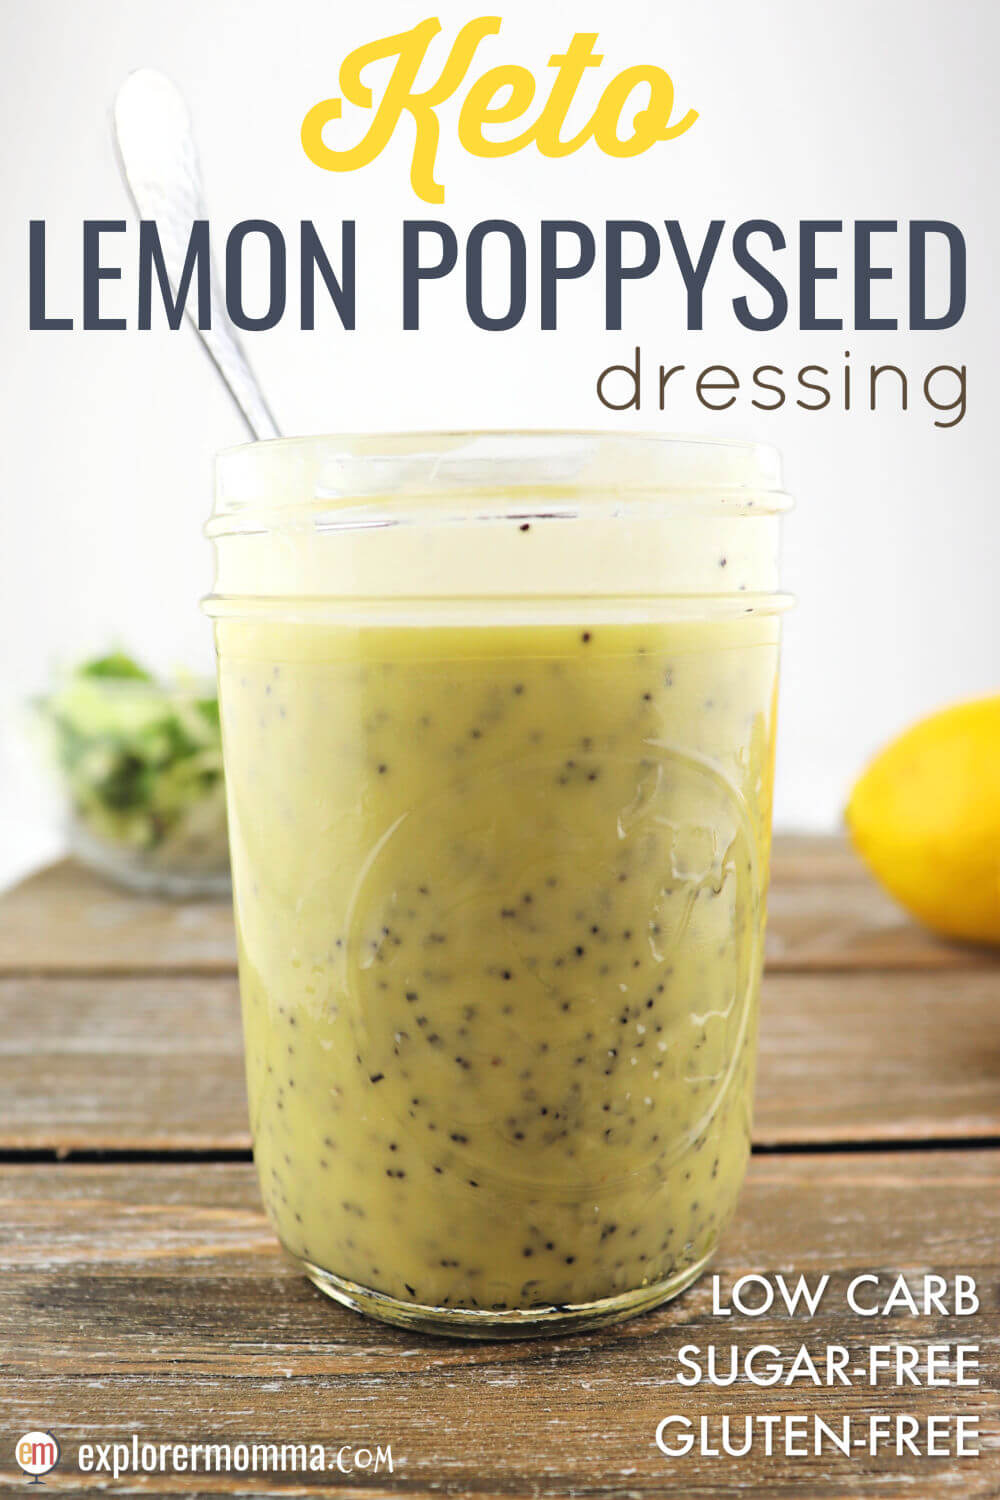 Tart and tangy with a hint of sweet, sugar-free lemon poppyseed is the perfect keto salad dressing recipe for a low carb diet. #ketosaladdressing #ketodressing #sugarfreedressing